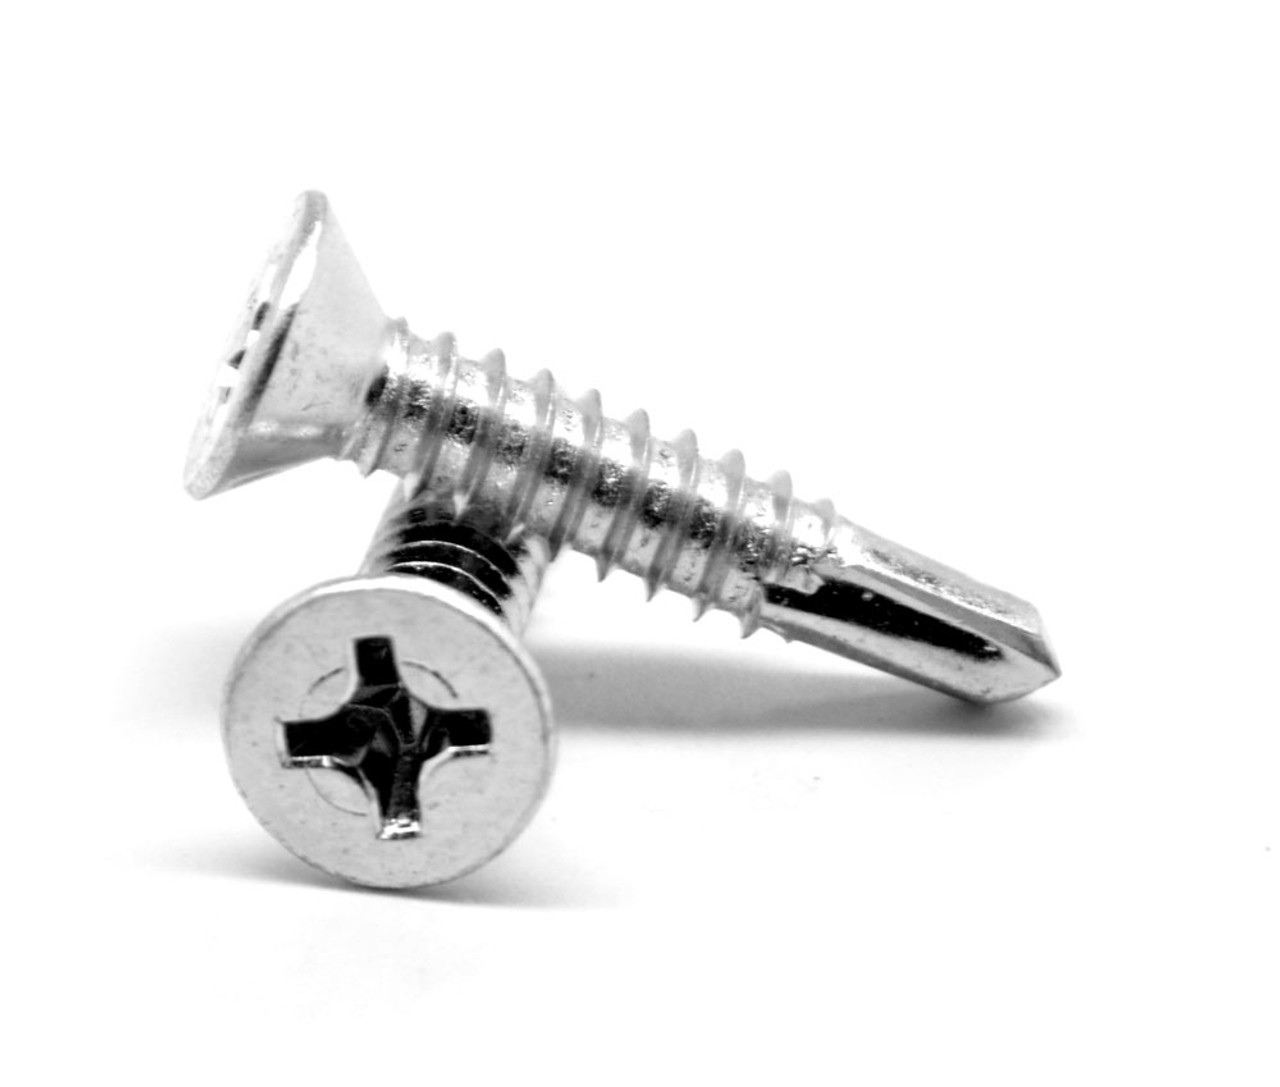 #6-20 x 3/4" (FT) Self Drilling Screw Phillips Flat Head #2 Point Stainless Steel 18-8